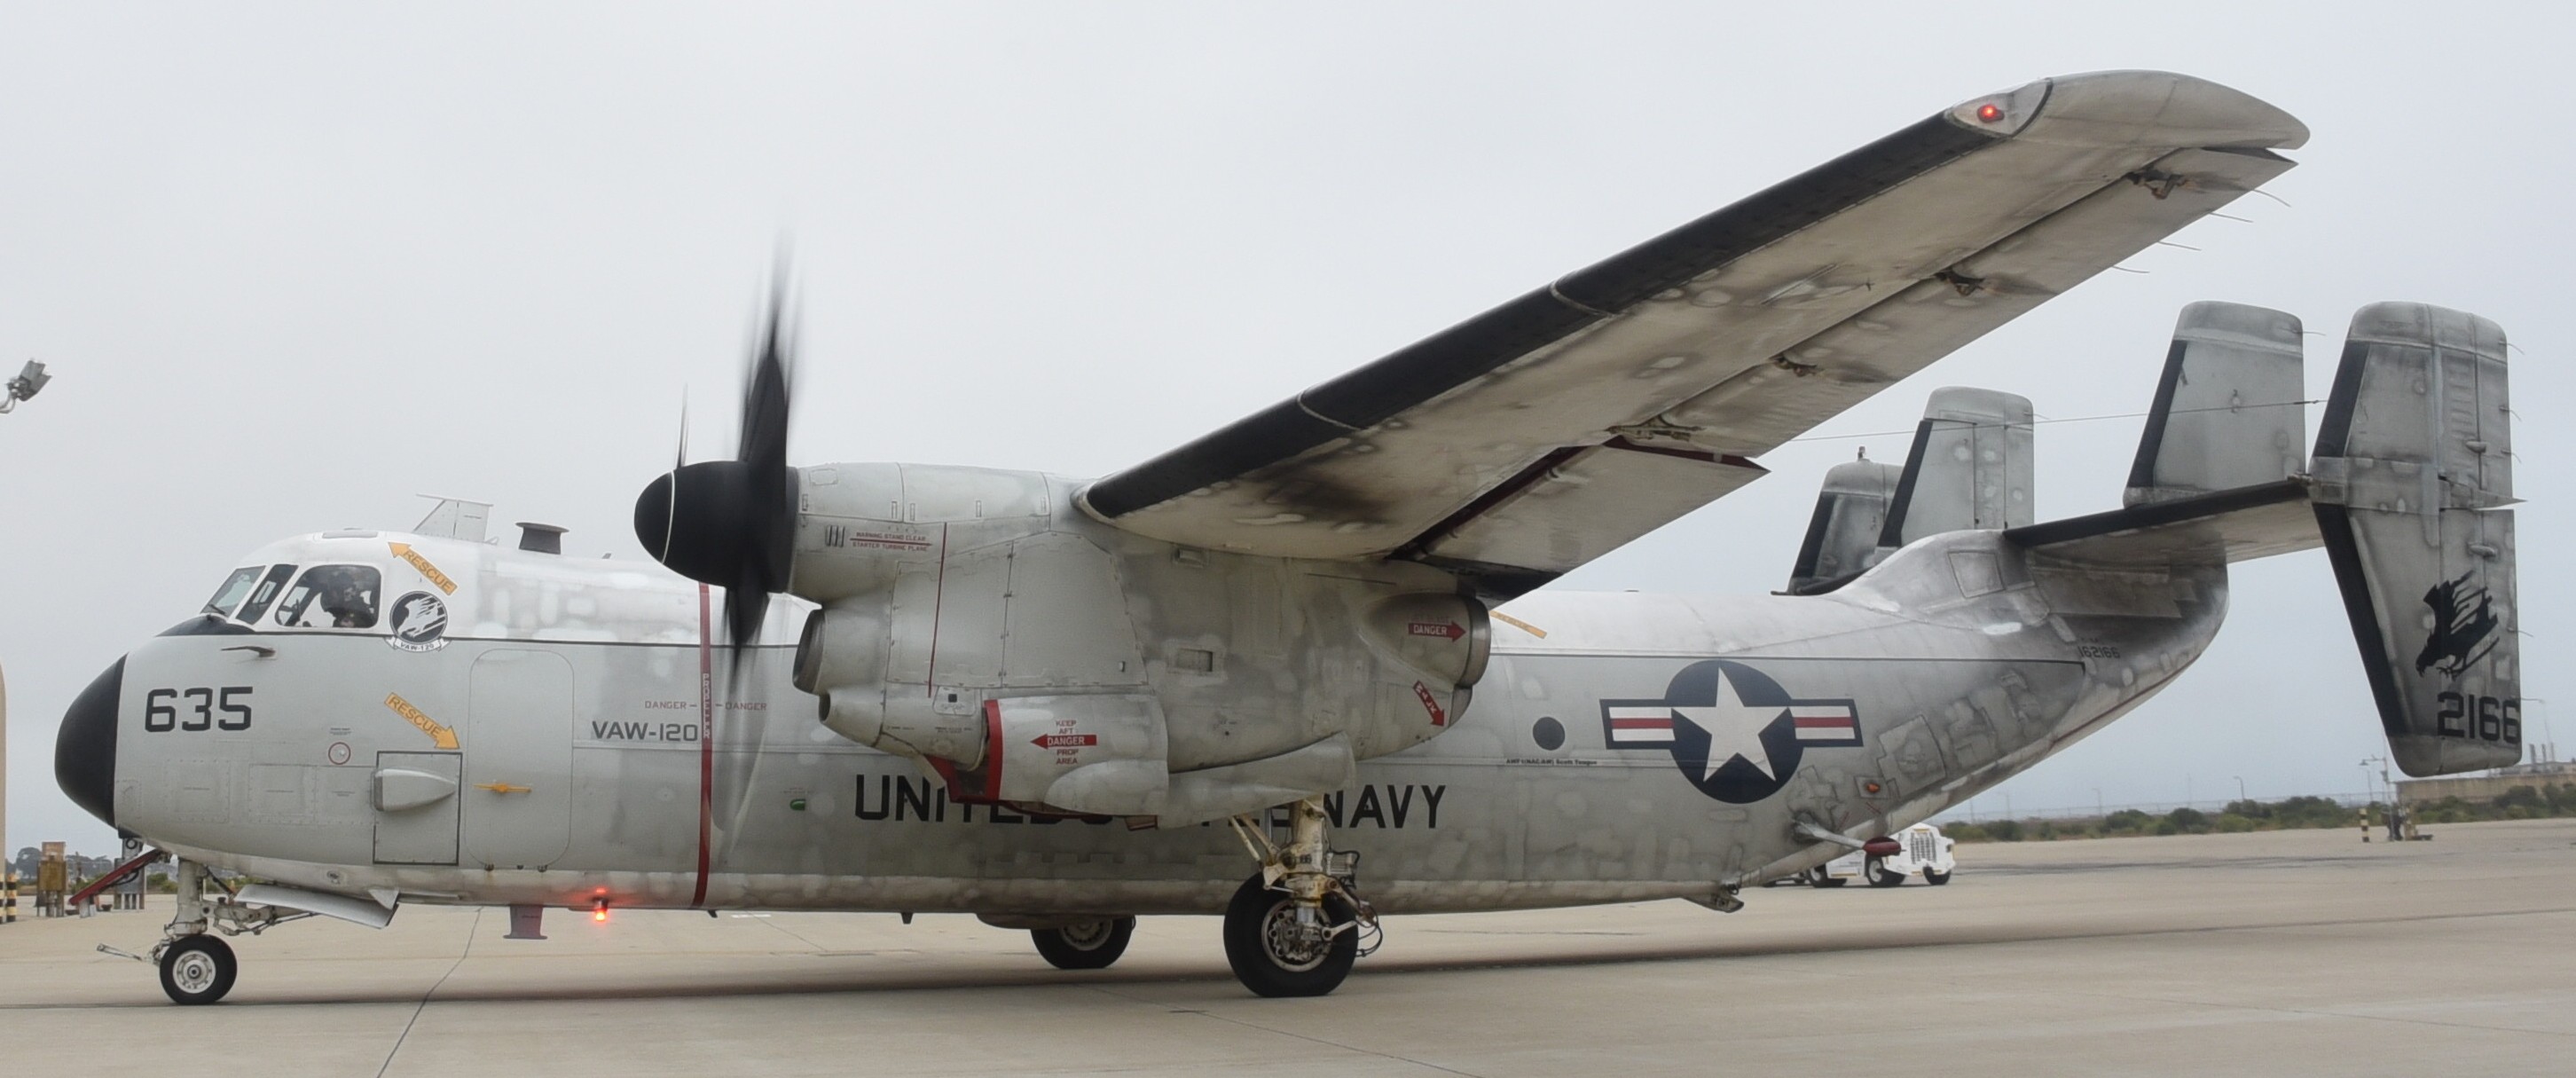 vaw-120 greyhawks airborne command control squadron c-2a greyhound replacement nas norfolk virginia 22